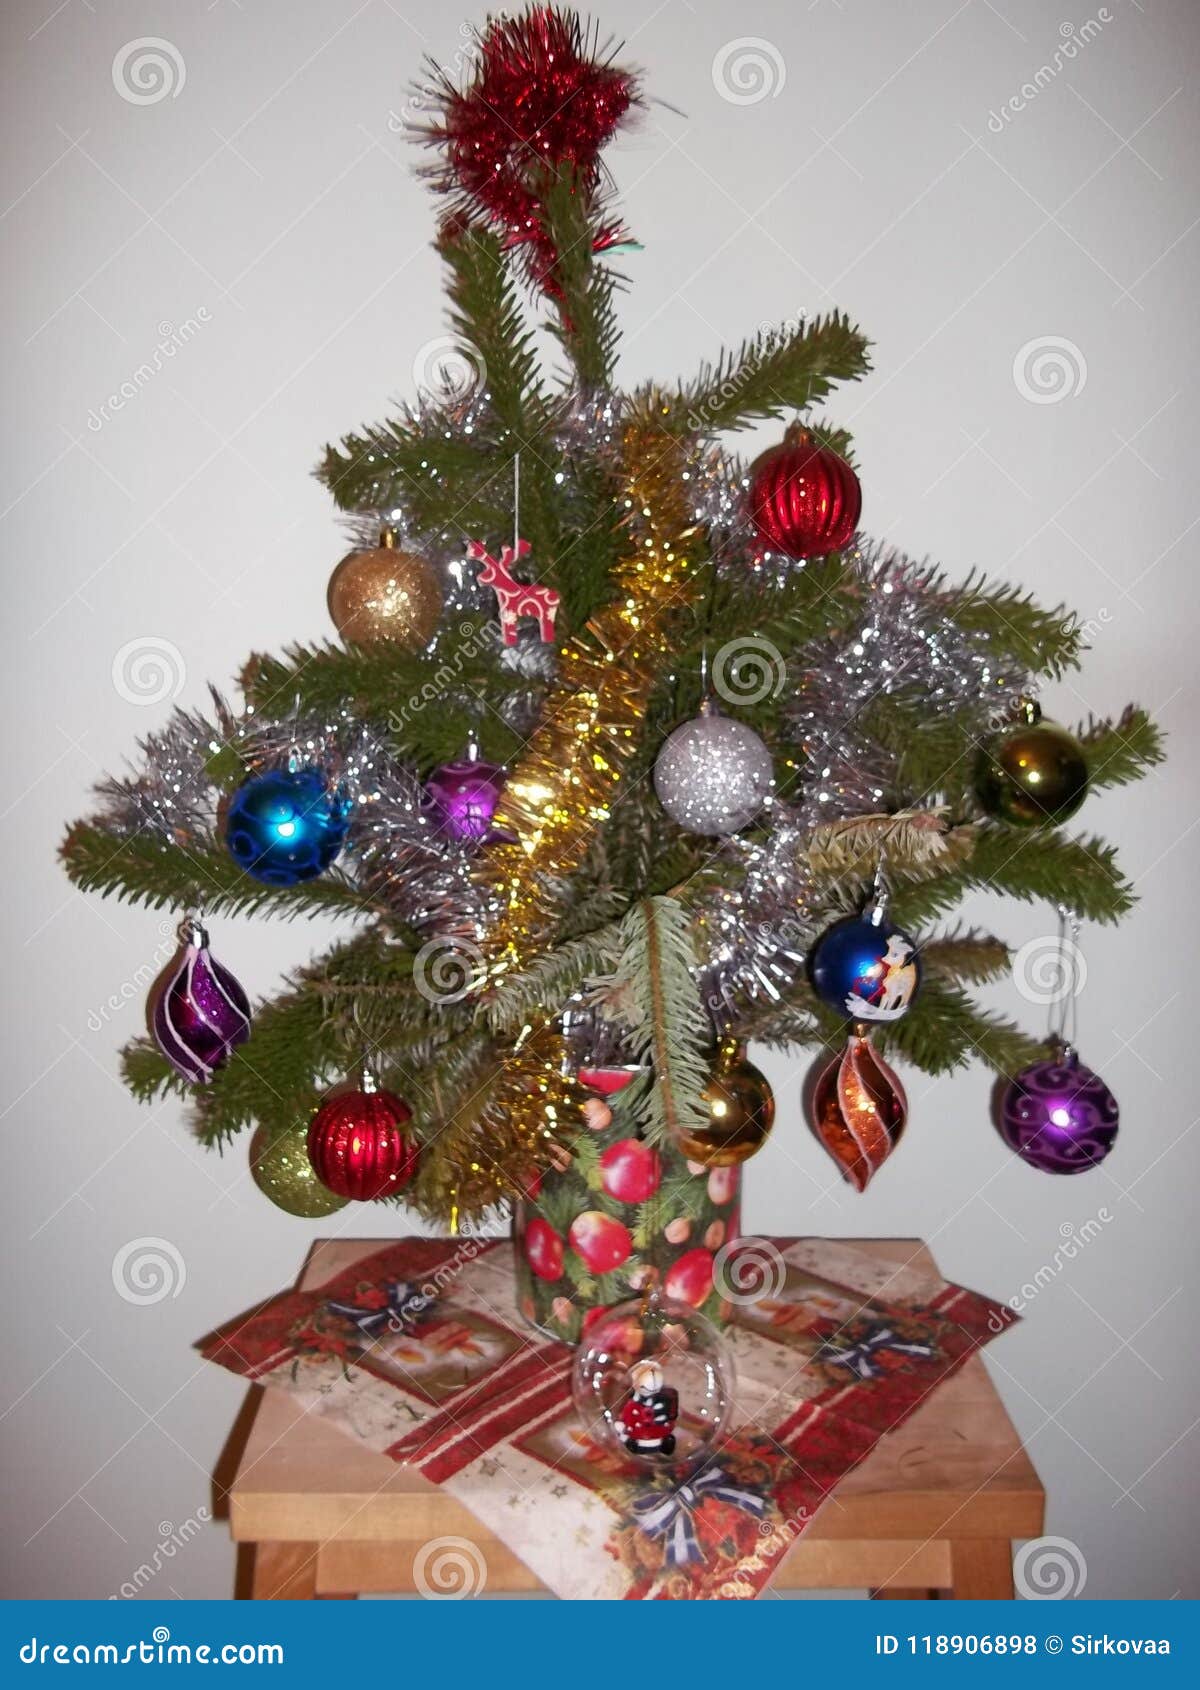 Small Christmas Tree in a Pot with Christmas Balls Stock Photo - Image ...